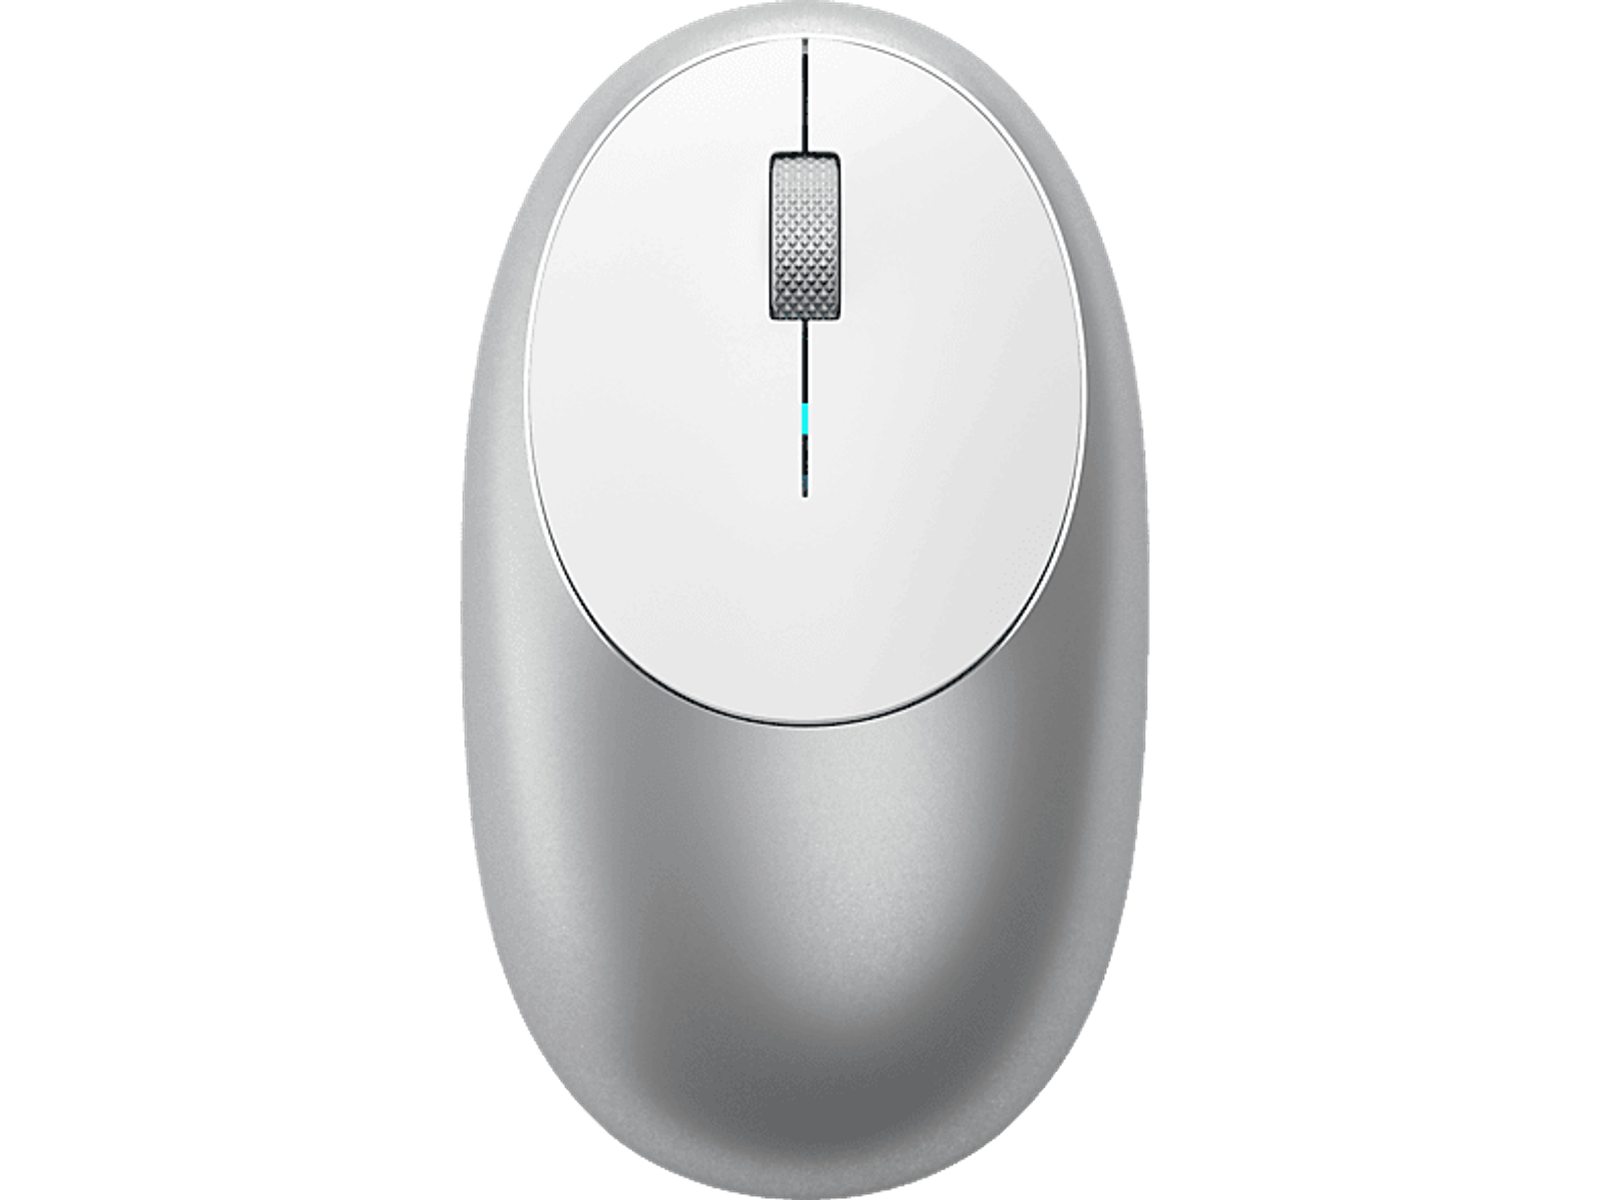 Maus, SATECHI Bluetooth - Mouse Wireless M1 Silber Silver